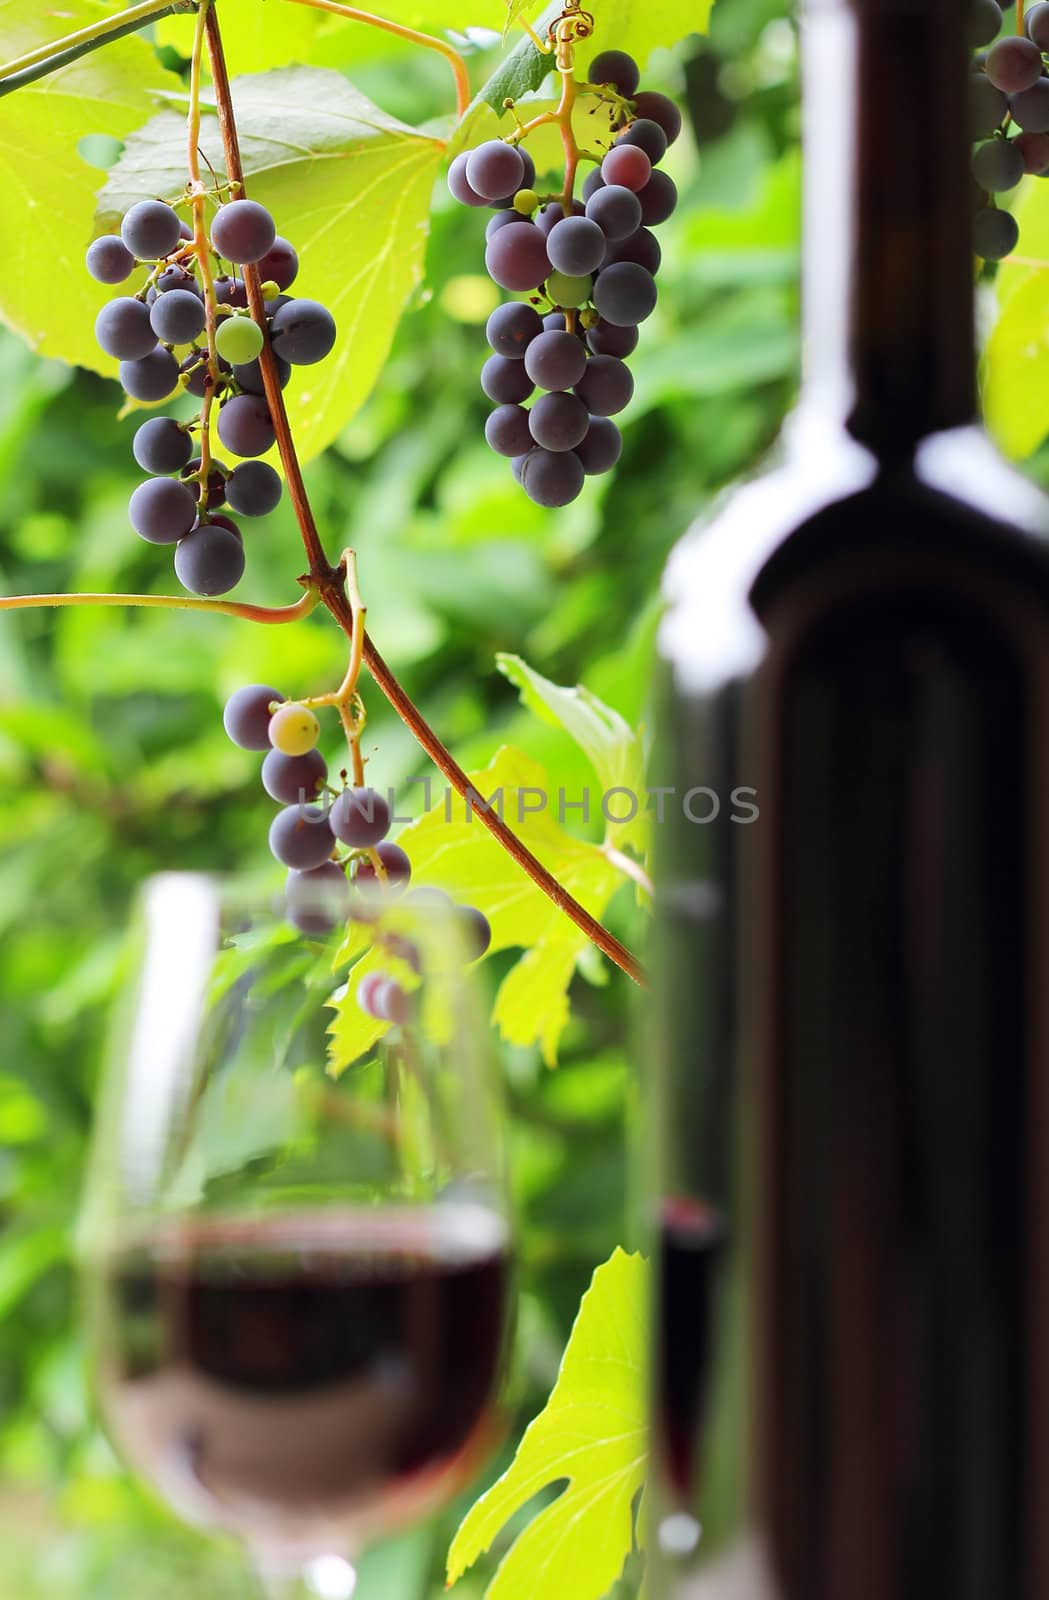 Grapes and wine   by captblack76